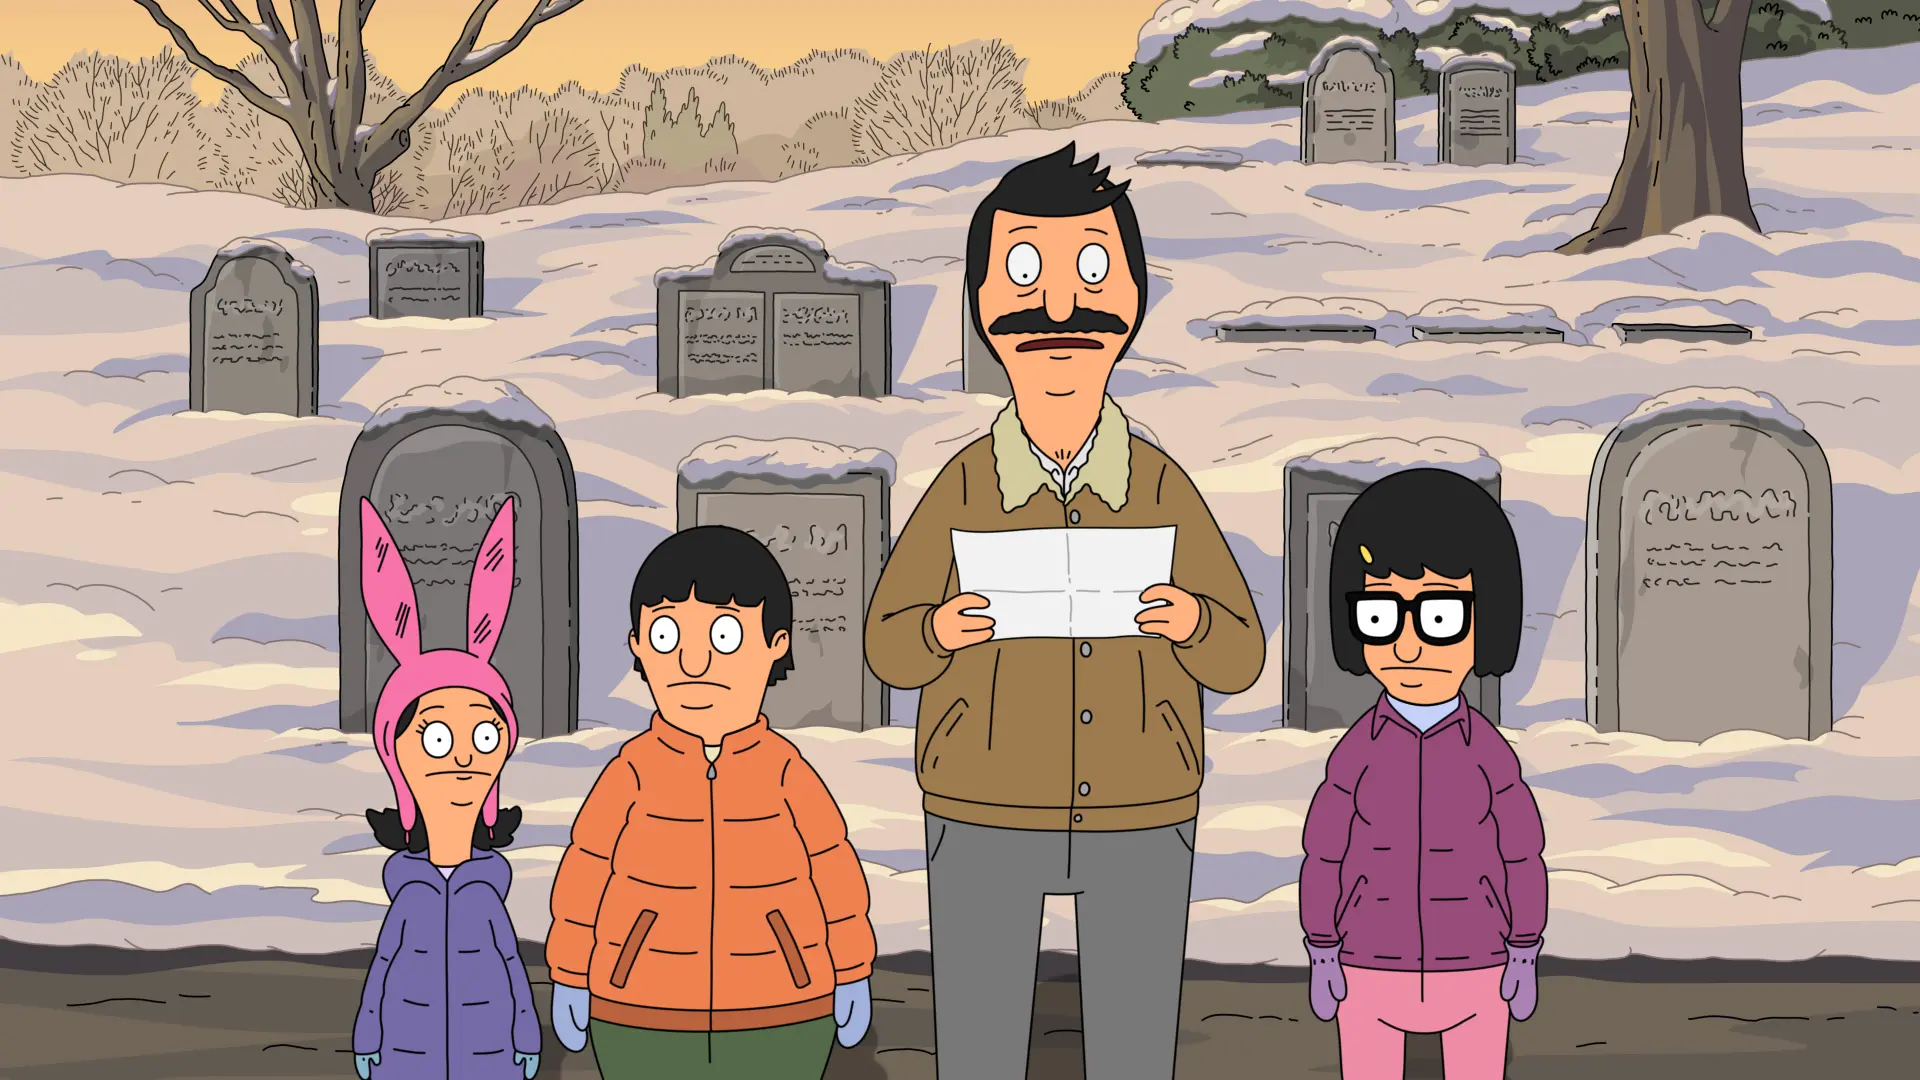 Bob's Burgers Season 14 Premiere: A Refreshing Return or a Missed Opportunity